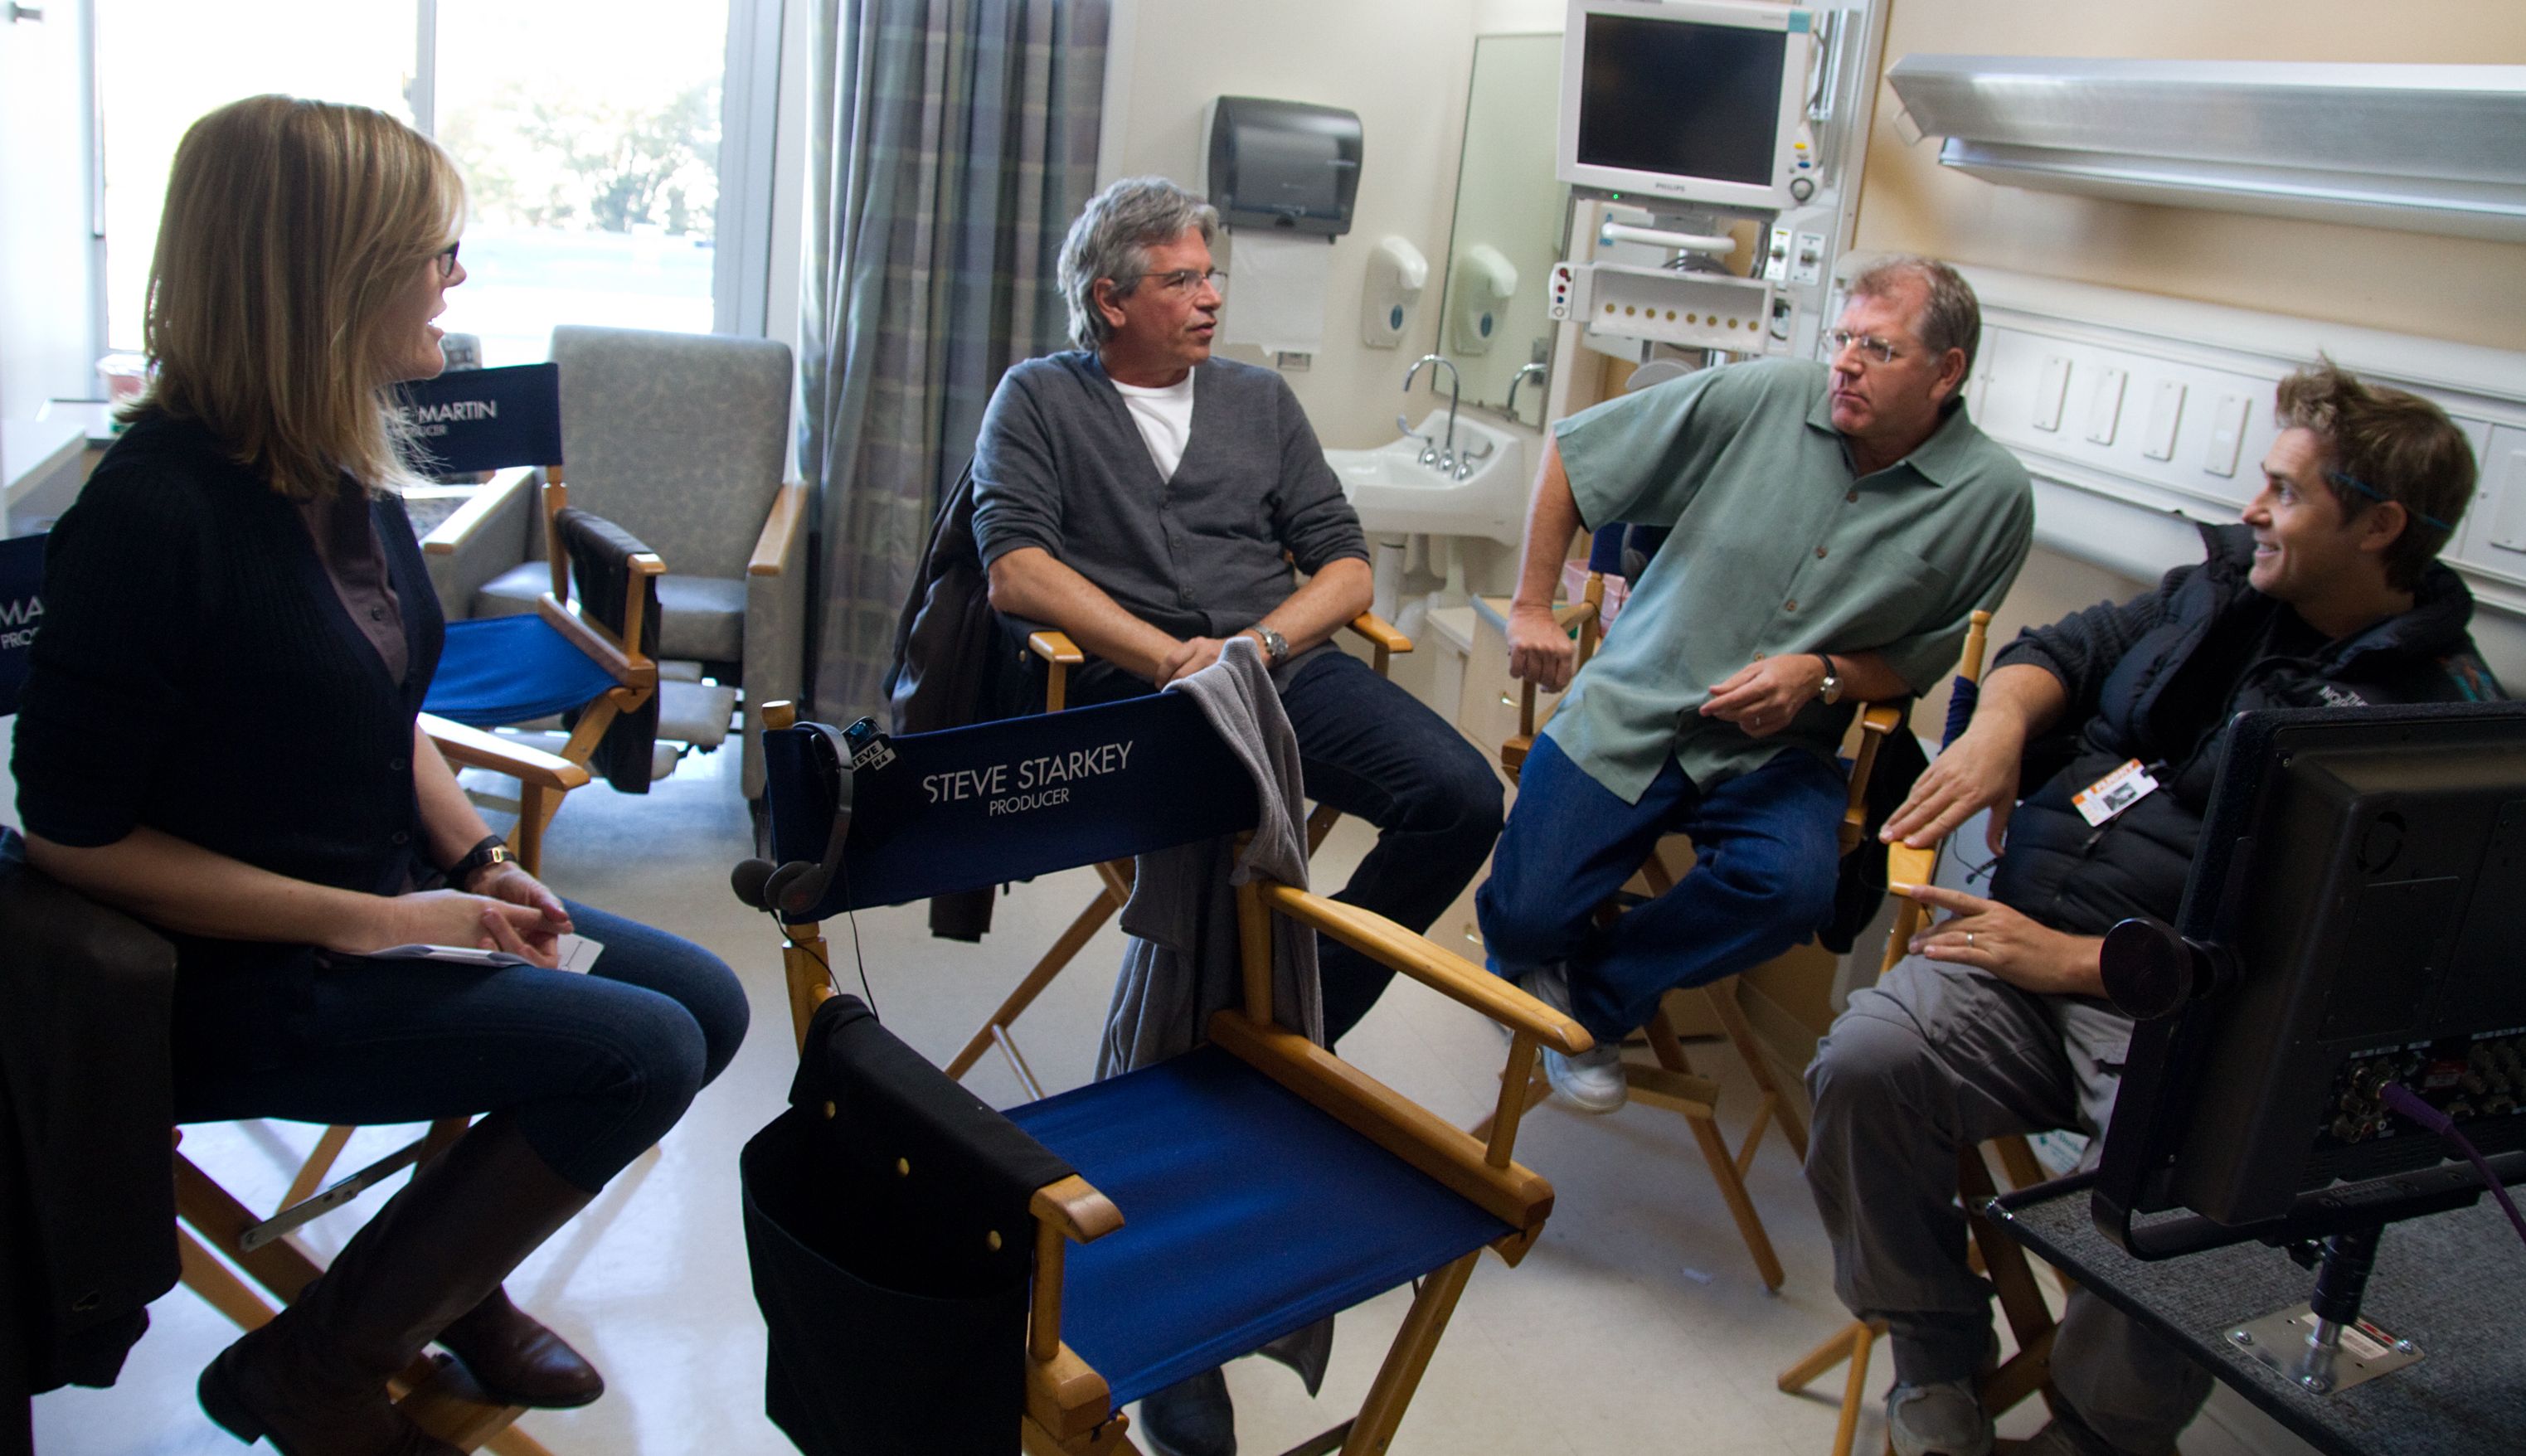 Robert Zemeckis behind the scenes in the hospital - Flight